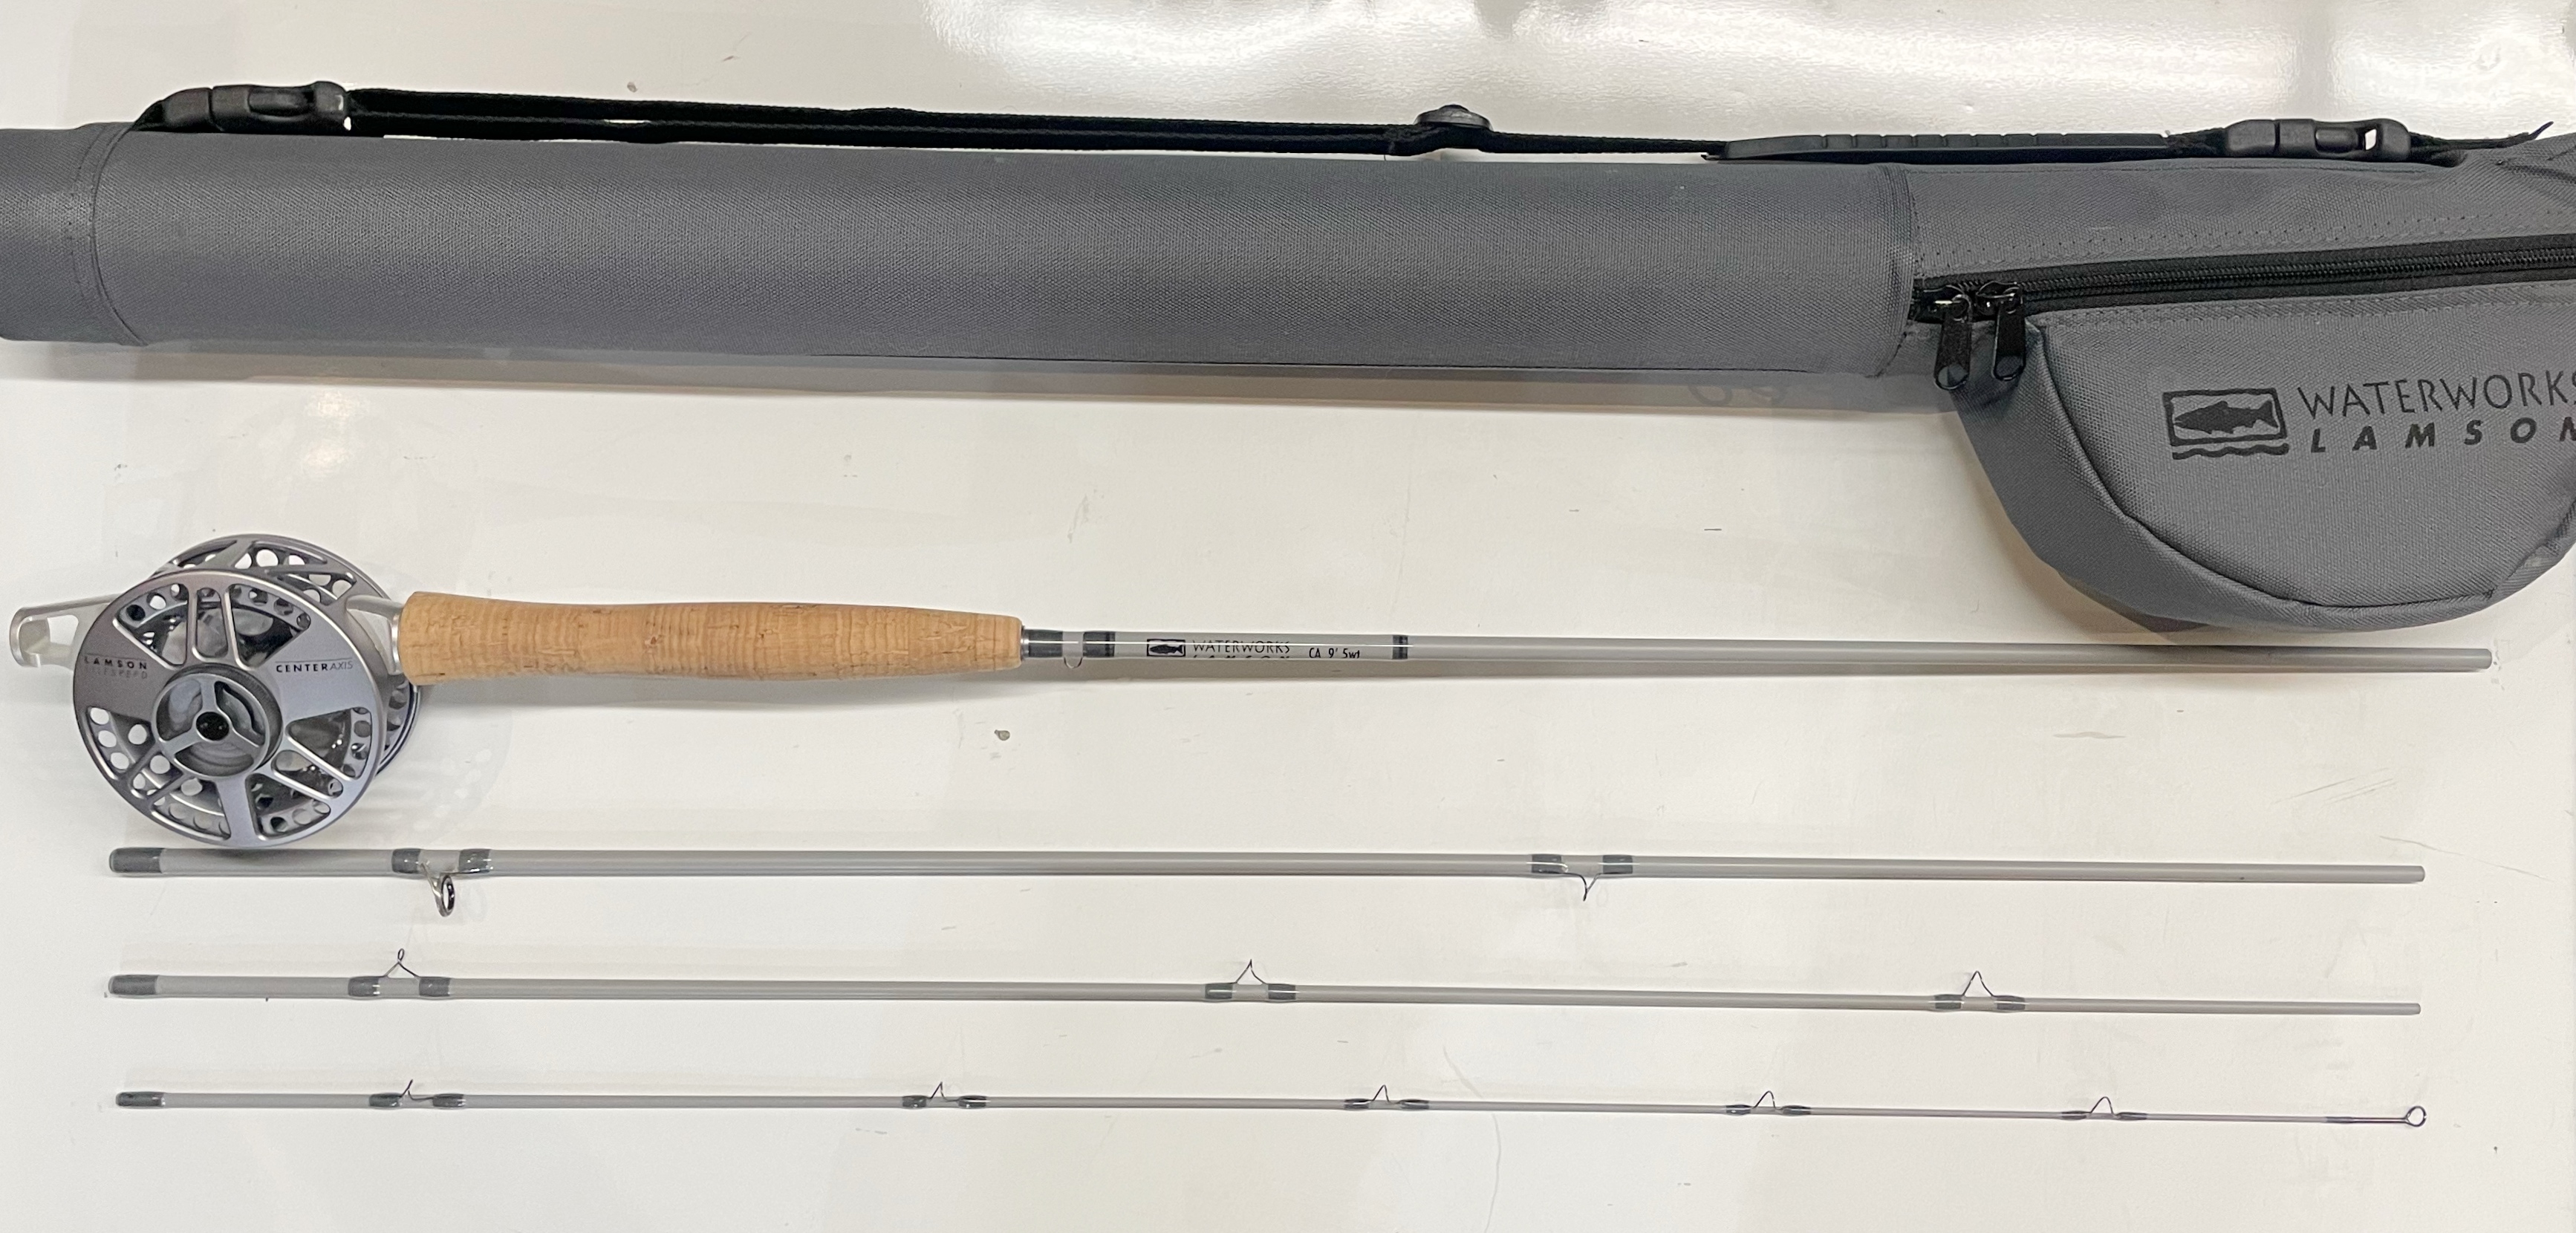 Used Lamson Center Axis 904-4pc Fly Rod and Reel - Western Rivers Flyfisher